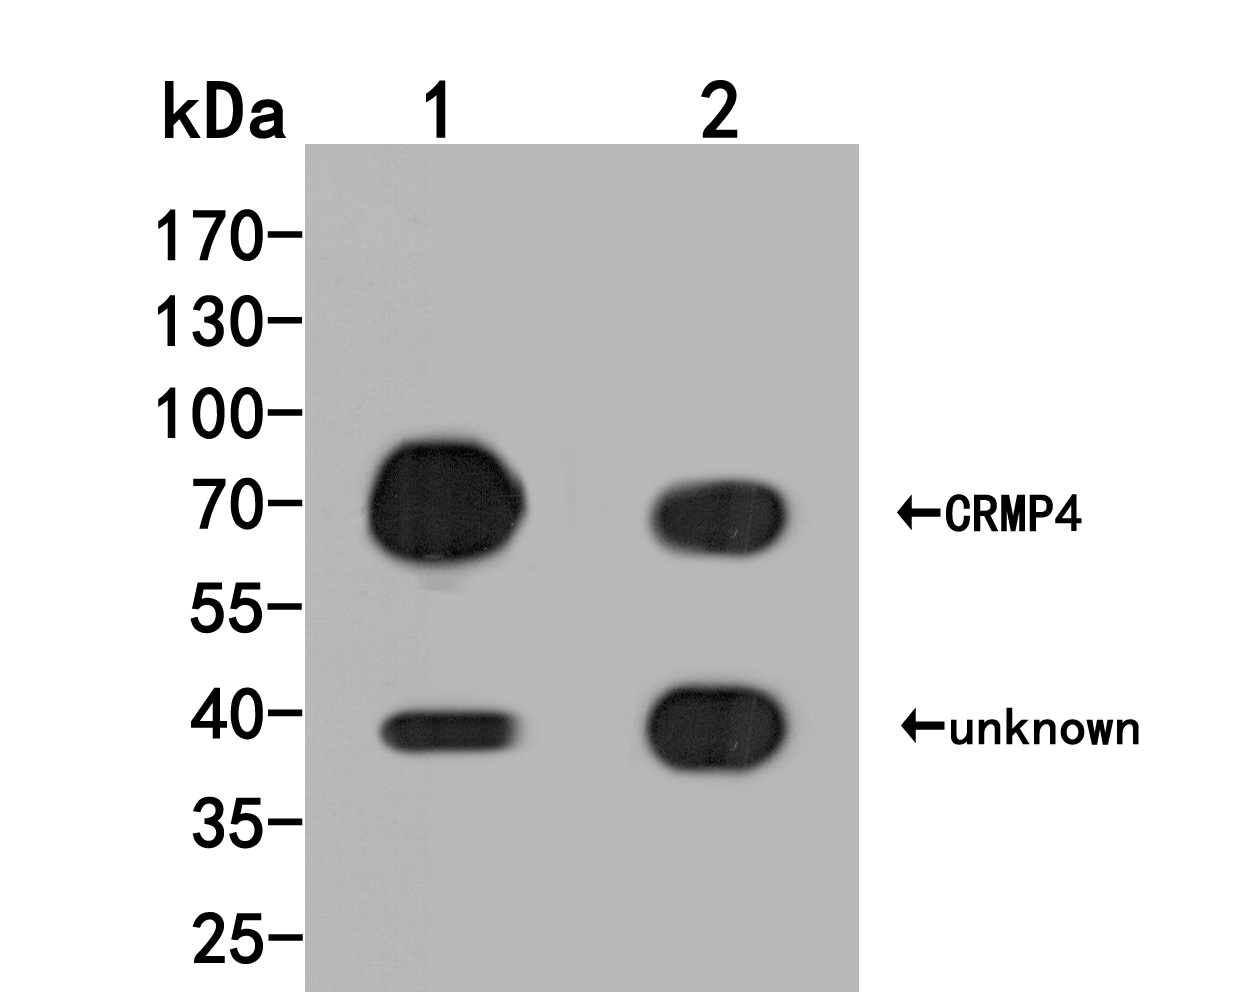 Western blot analysis of CRMP4 on different lysates. Proteins were transferred to a PVDF membrane and blocked with 5% BSA in PBS for 1 hour at room temperature. The primary antibody (HA500030, 1/500) was used in 5% BSA at room temperature for 2 hours. Goat Anti-Rabbit IgG - HRP Secondary Antibody (HA1001) at 1:5,000 dilution was used for 1 hour at room temperature.<br />
Positive control: <br />
Lane 1: Rat spinal cord tissue lysate<br />
Lane 2: LO2 cell lysate